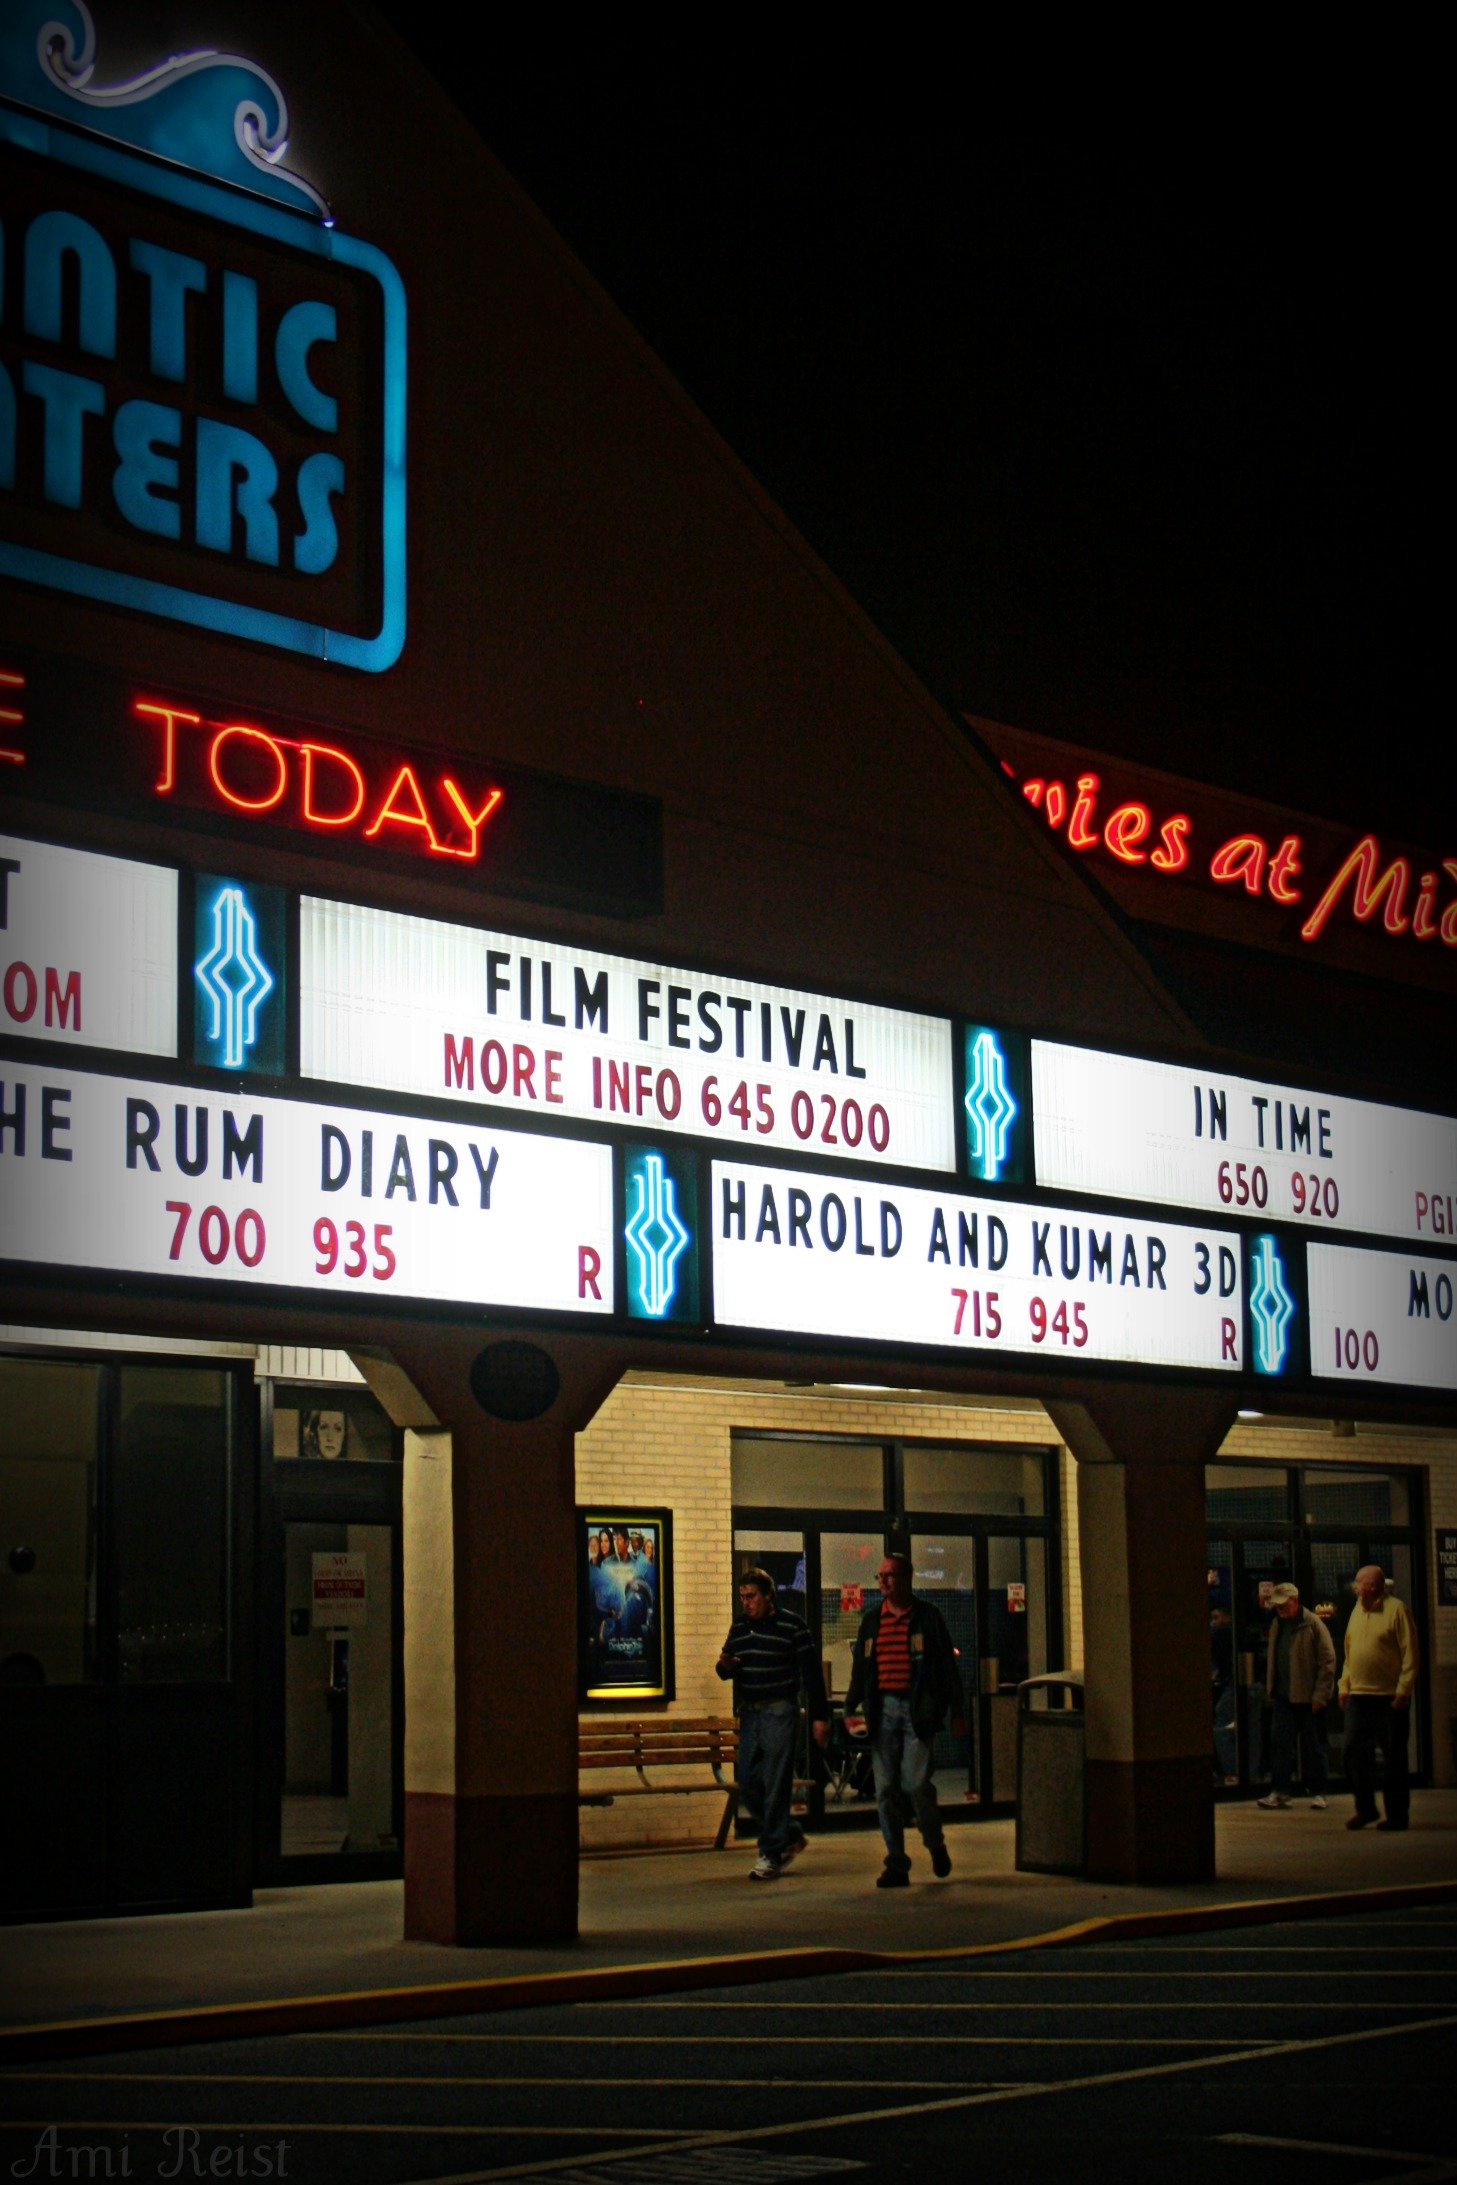 The Rehoboth Beach Independent Film Festival The Tree Shorebread